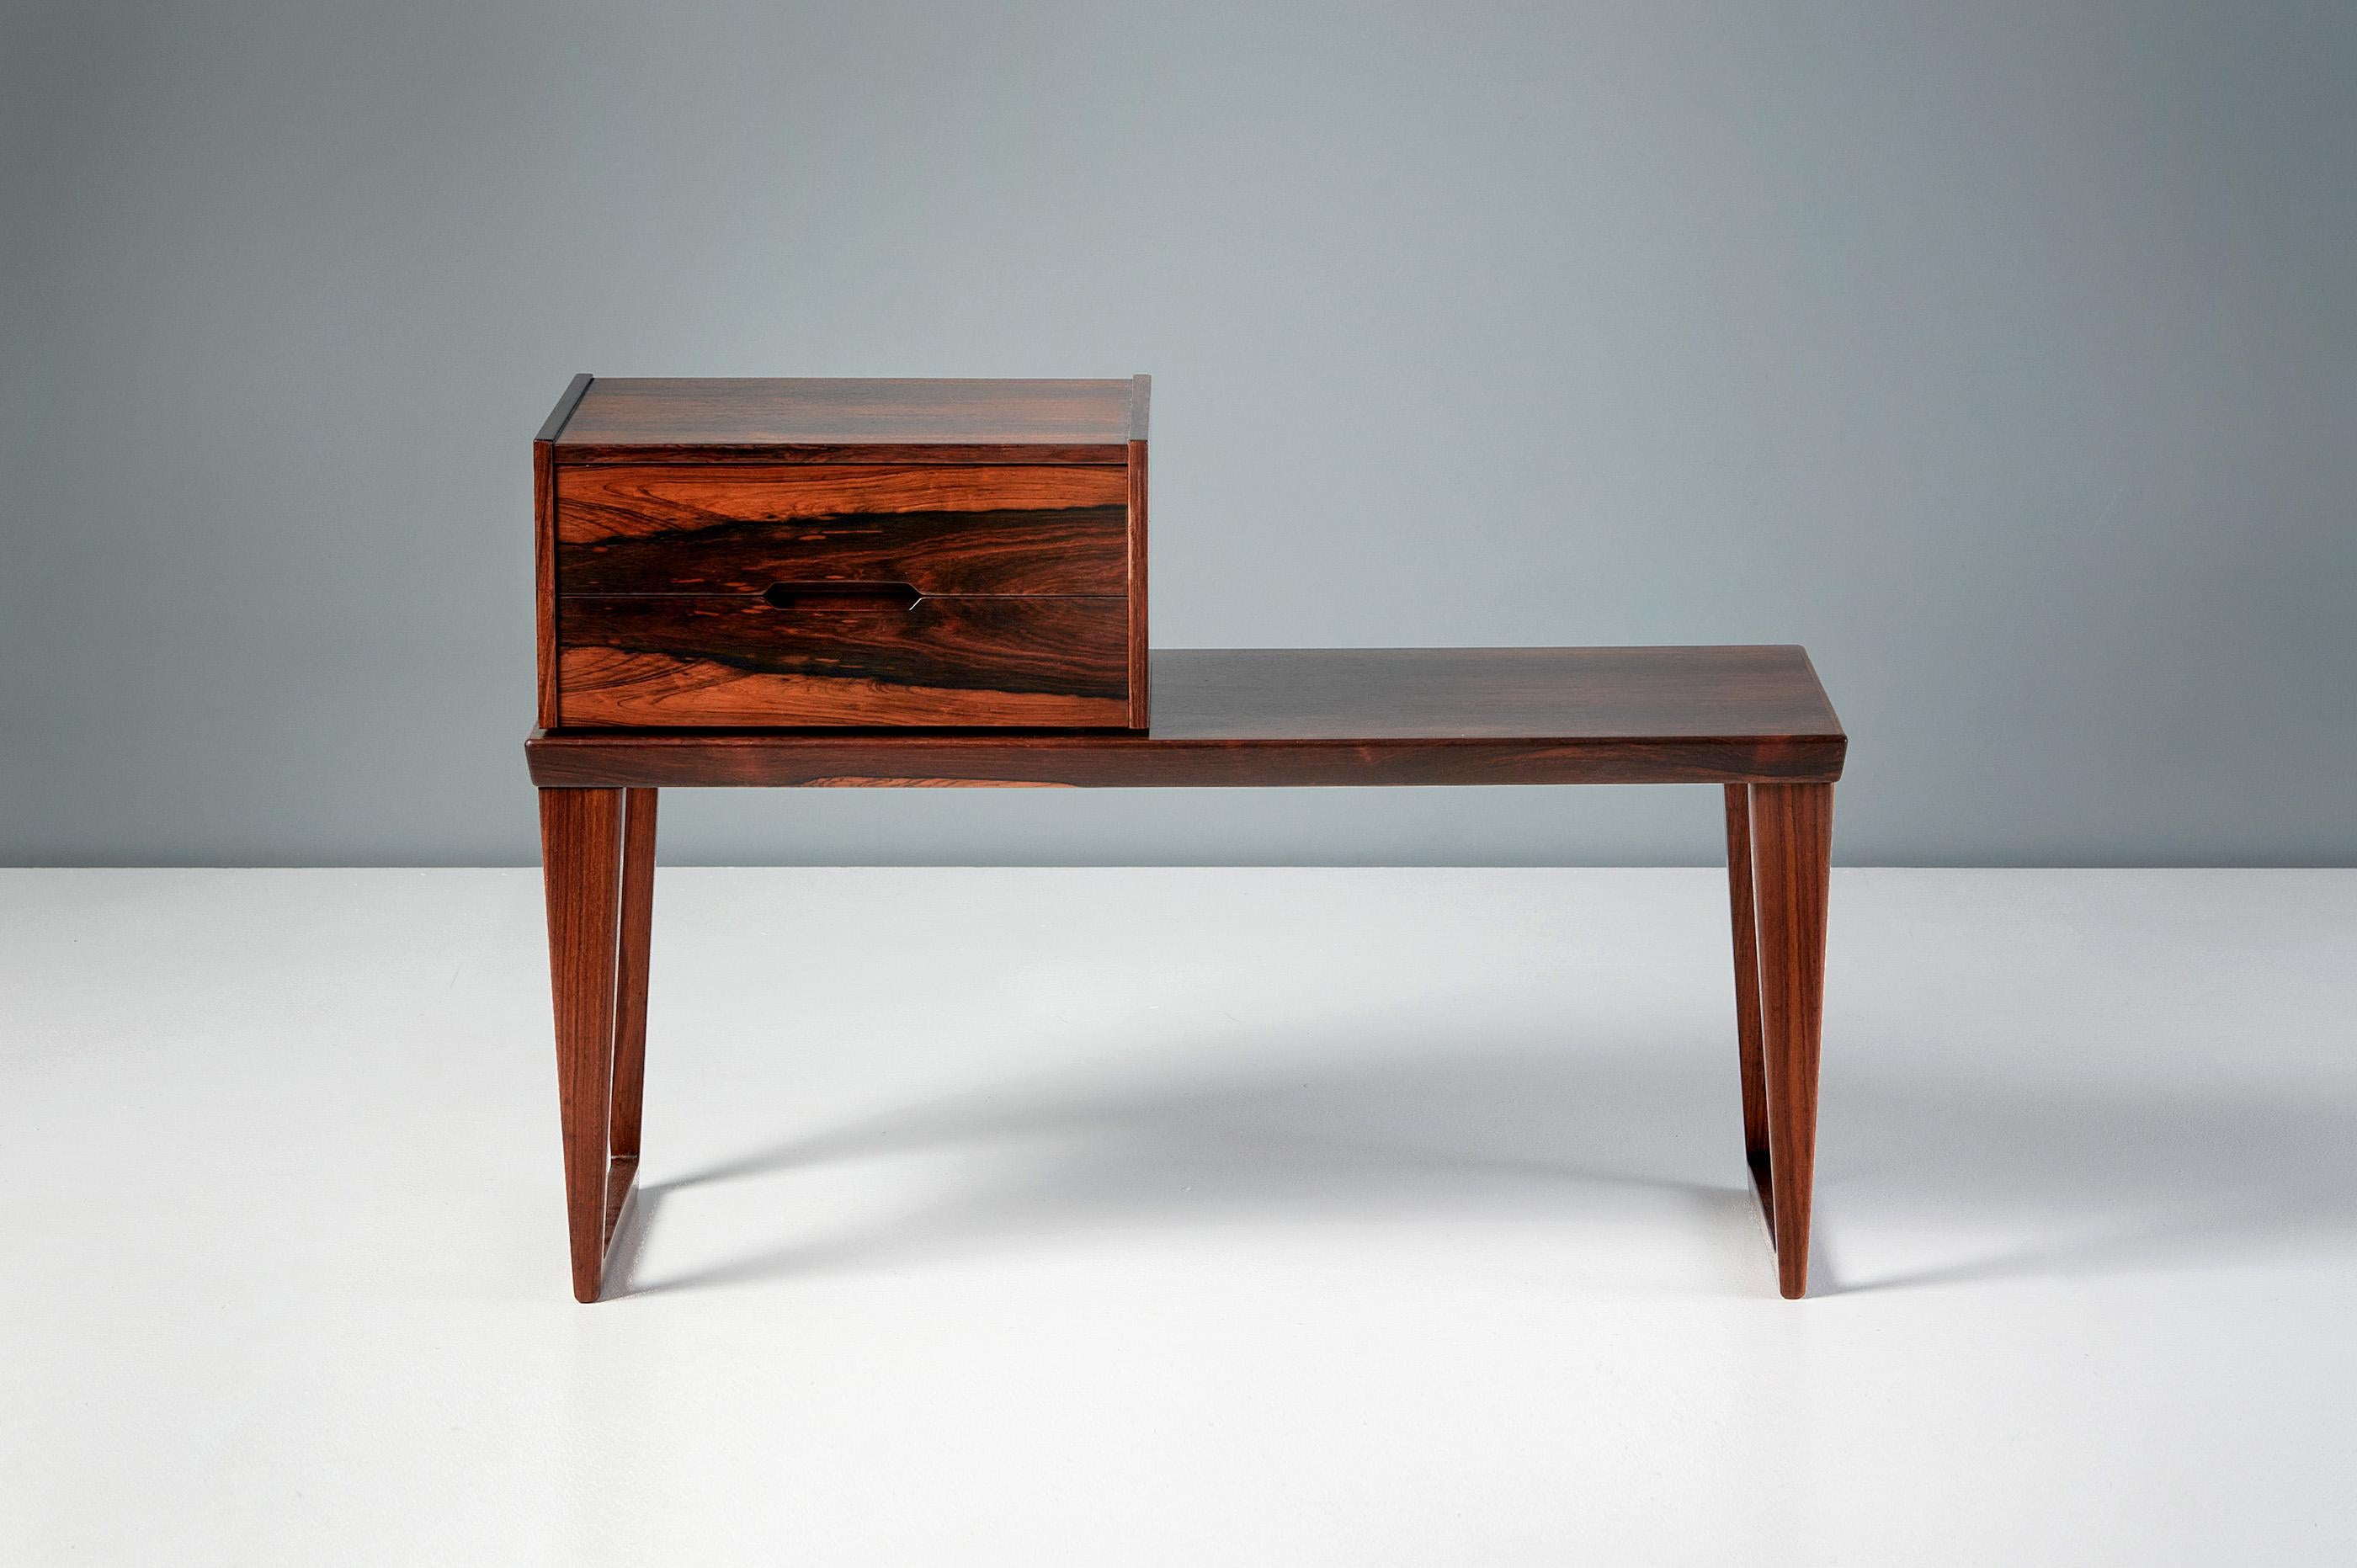 Stunning, exotic grained rosewood bench with matching, loose standing two-drawer unit which can be positioned anywhere along the bench surface. This piece was designed by Danish design icon Kai Kristiansen and produced by Aksel Kjersgaard in Odder,